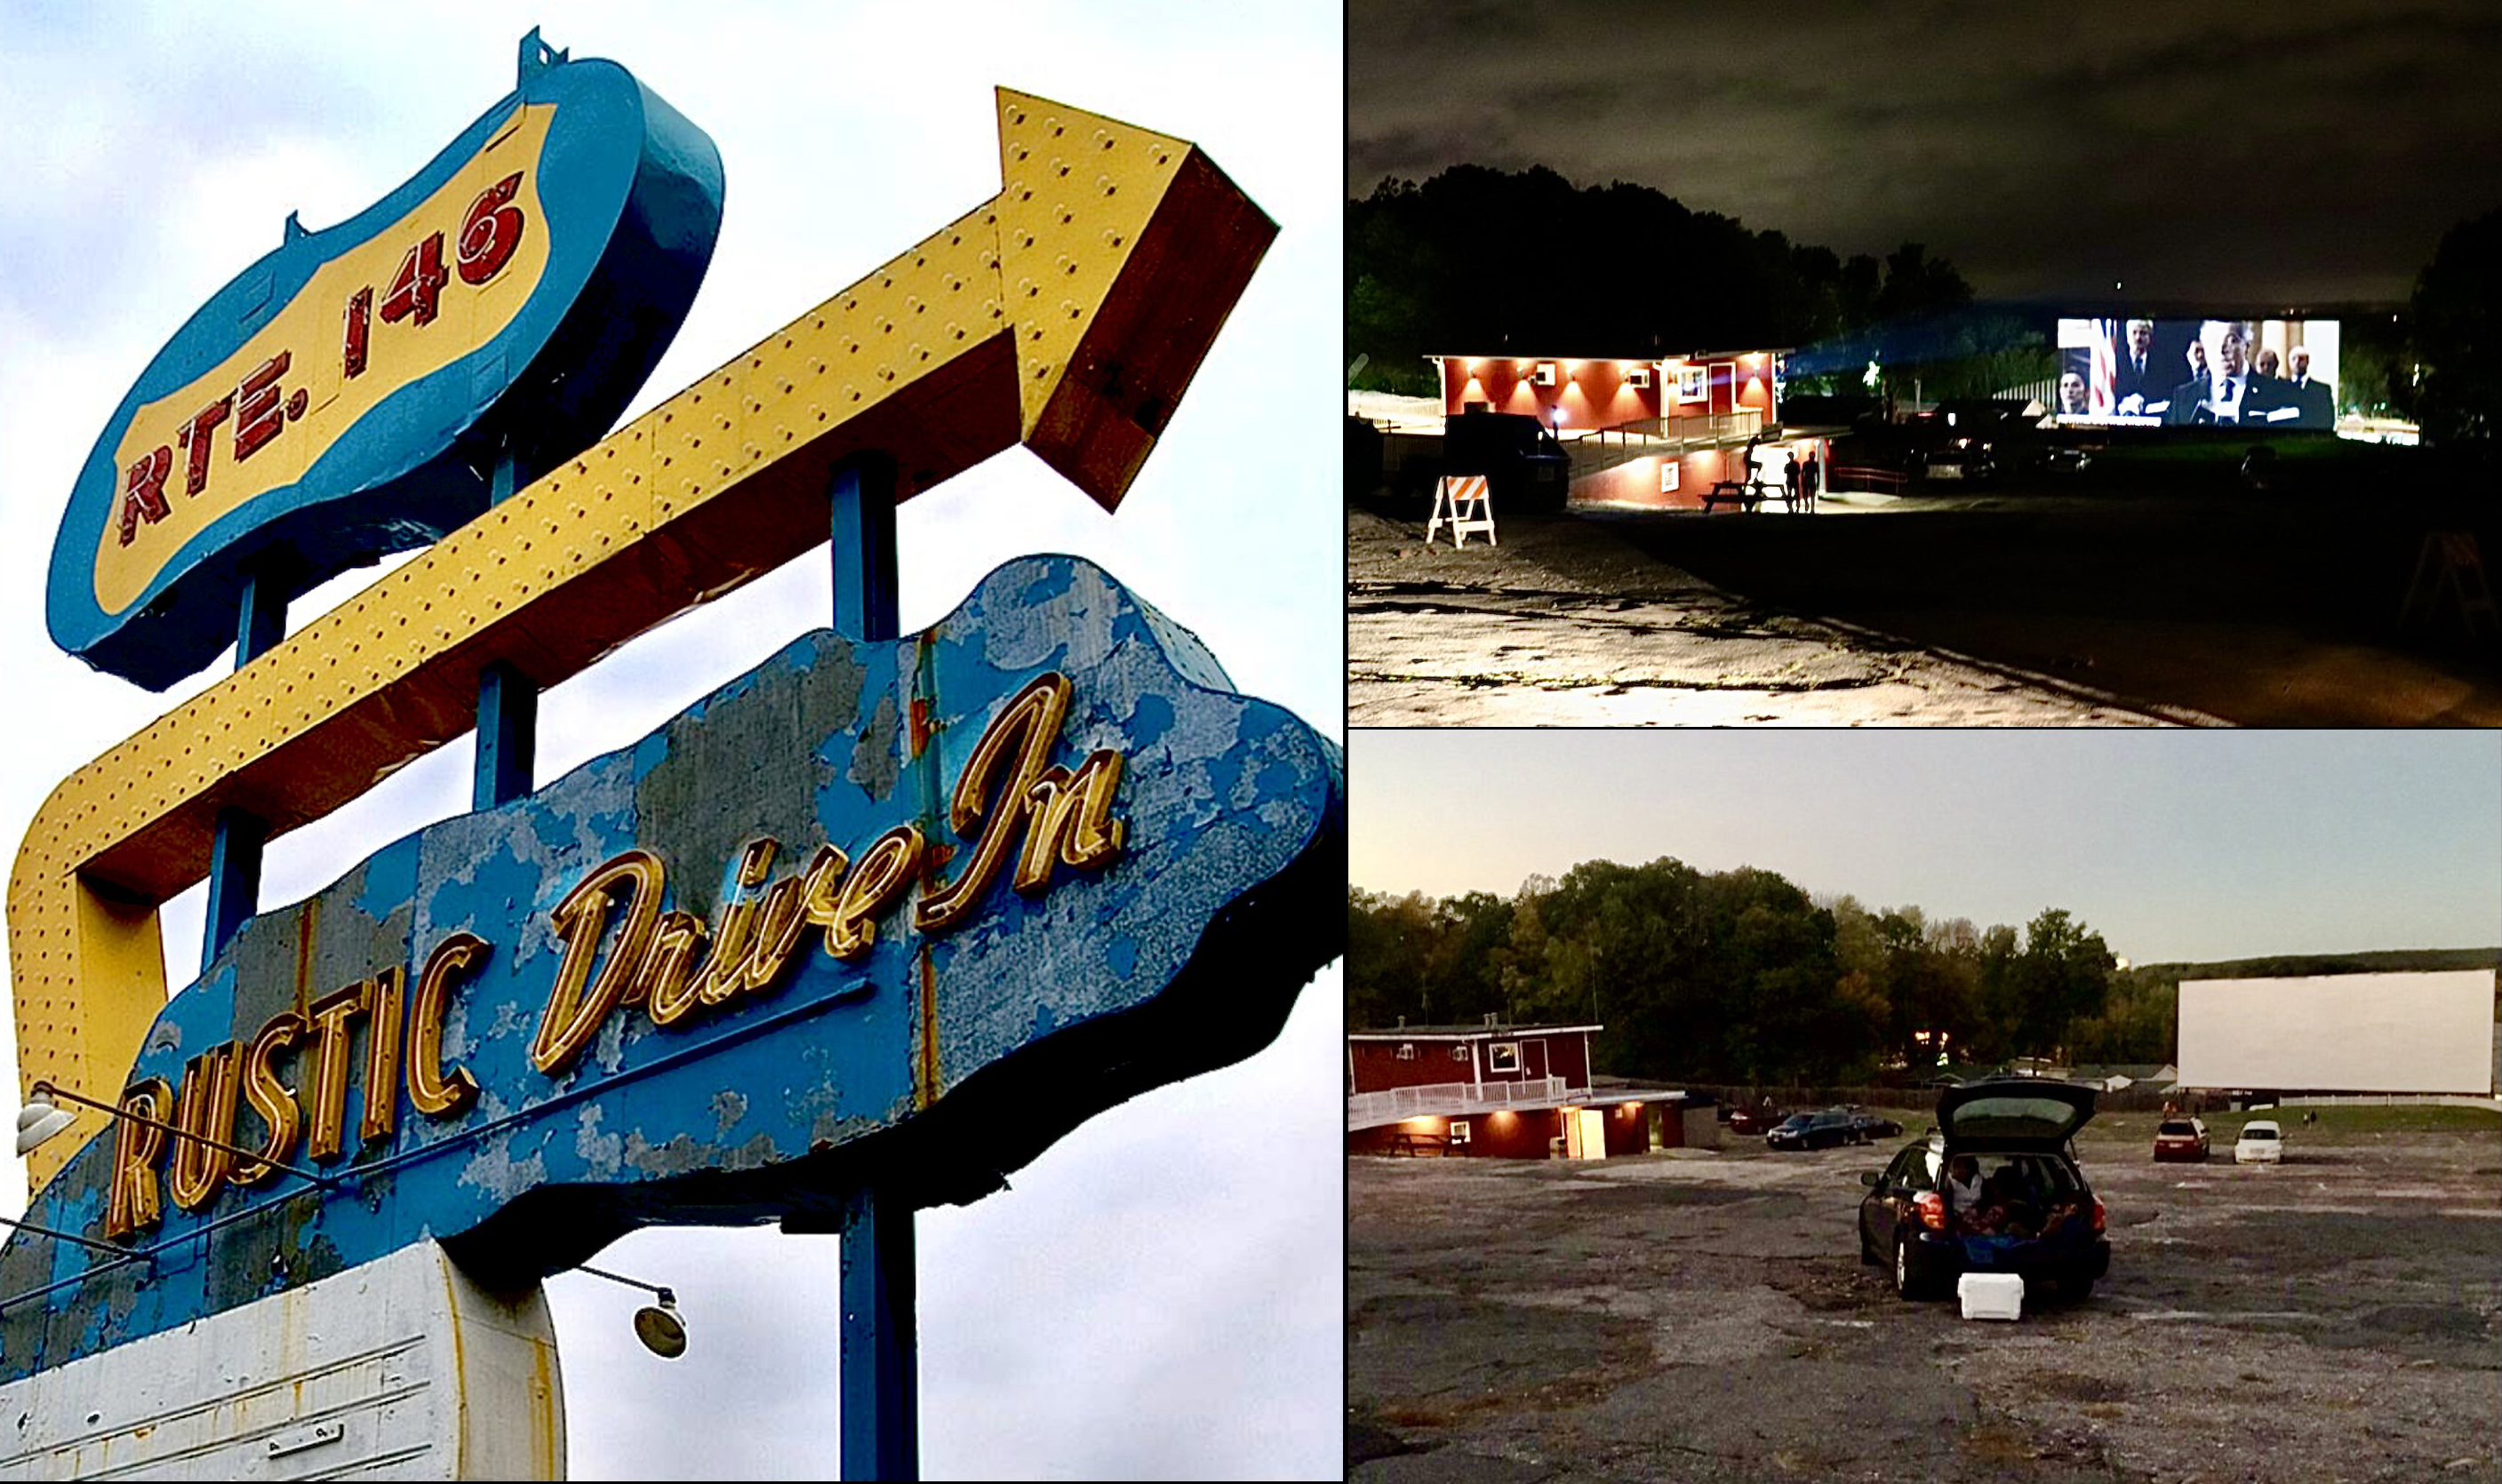 Rustic Drive-in sign and lot with screen